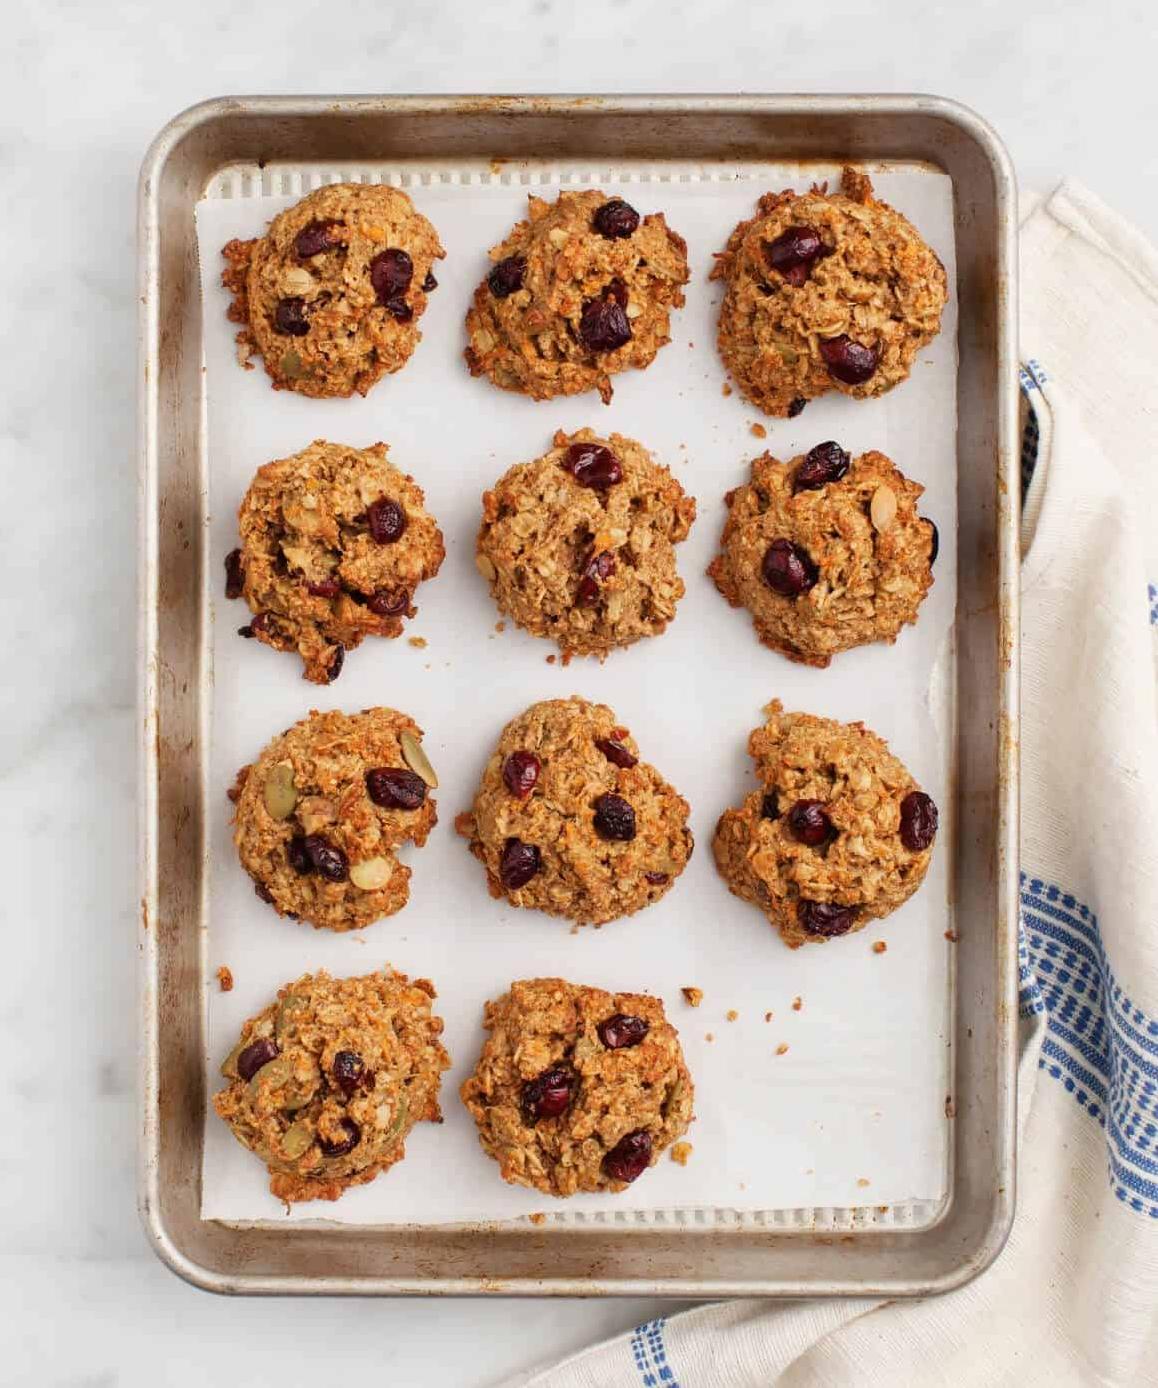  Crispy on the outside and chewy on the inside - it's a cookie lover's dream!